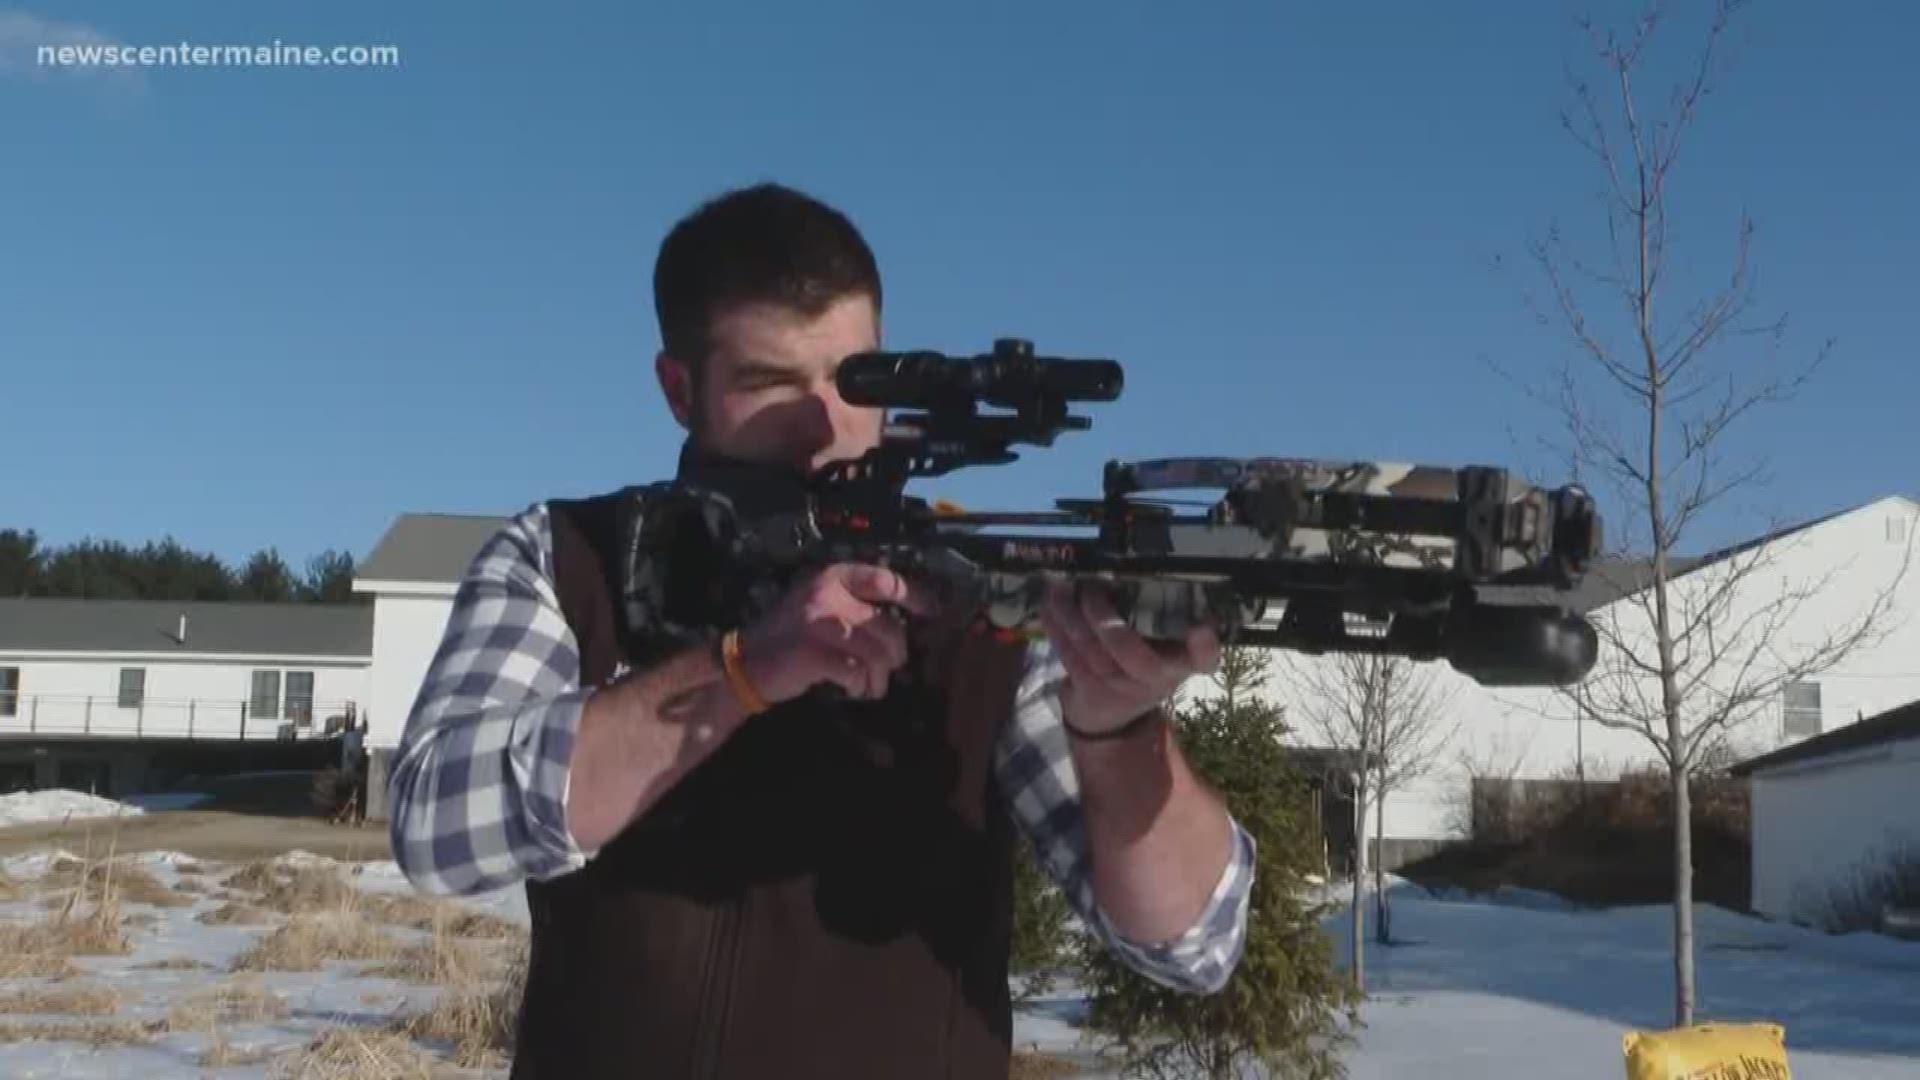 Crossbow hunters are asking Maine legislators to pass a bill allowing for crossbow use during archery season.